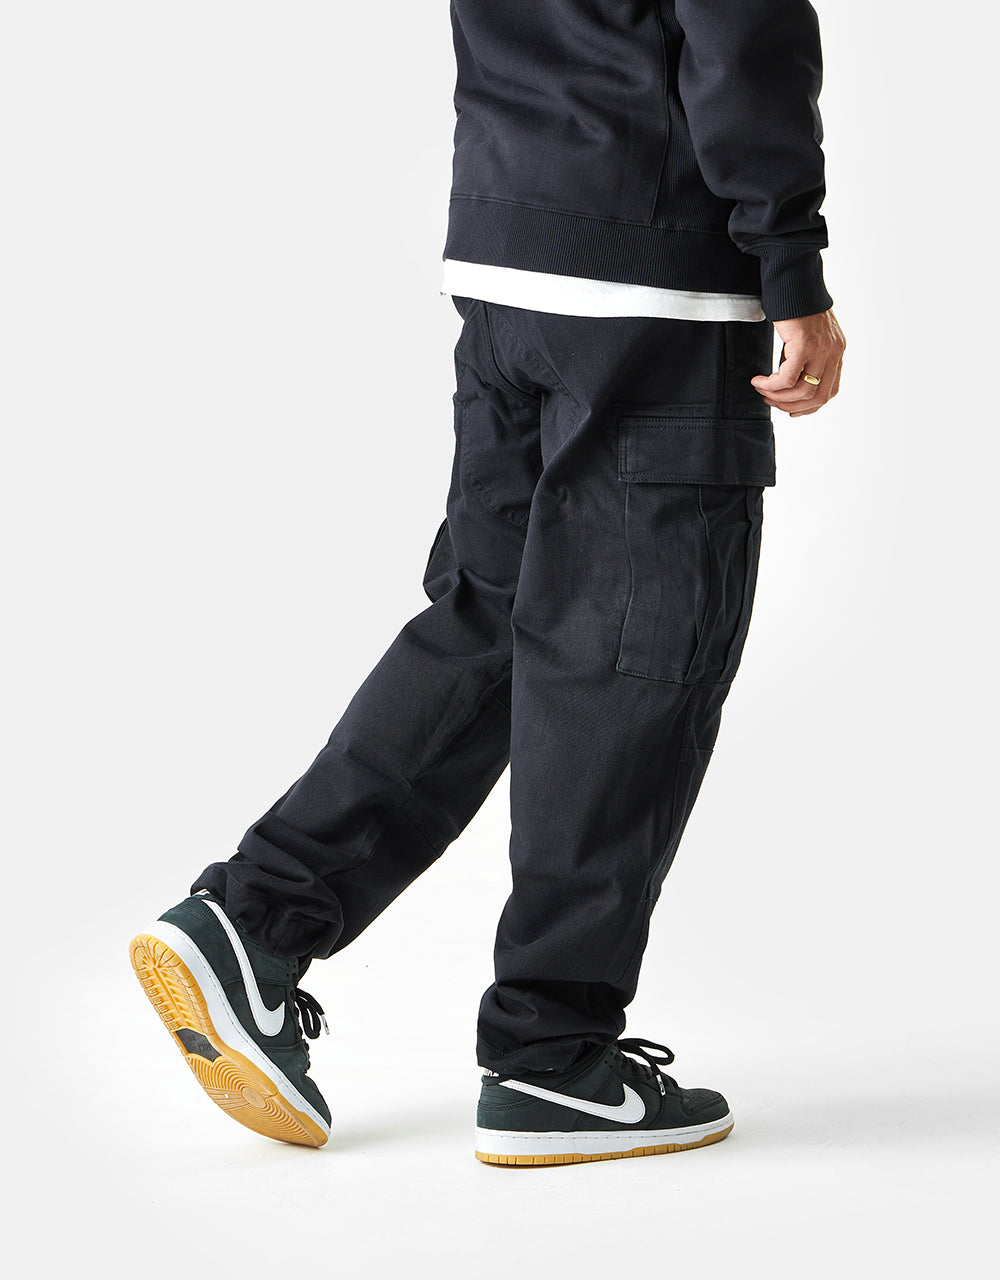 Route One Classic Cargo Pants - Black